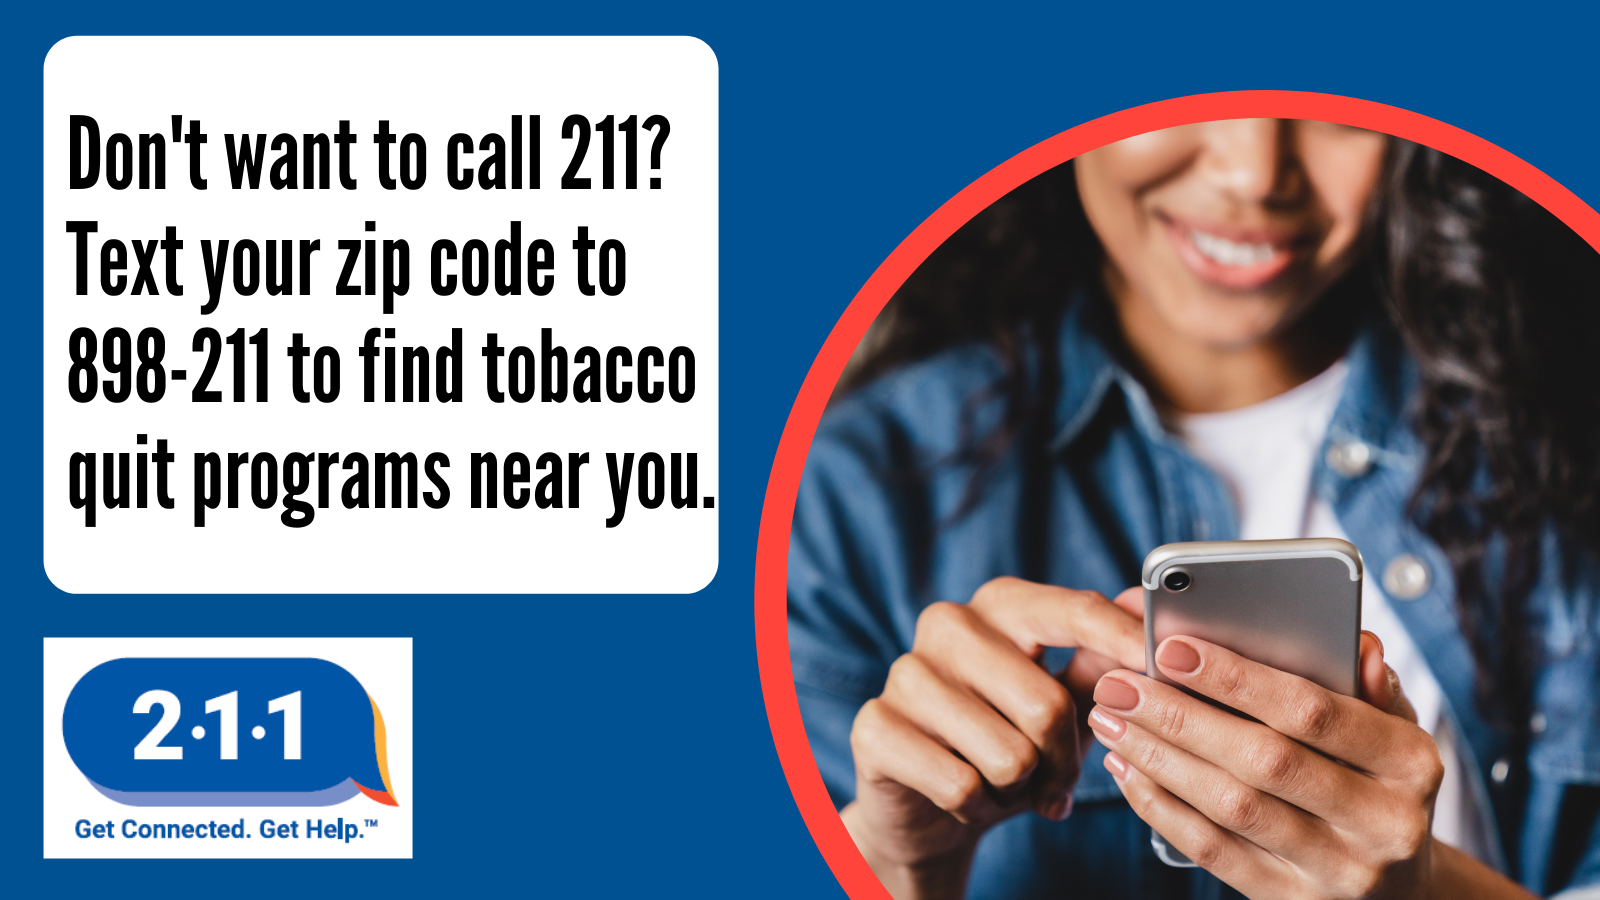 Person texting on phone and text: Don't want to call 211? Text your zip code to 898-211 to find tobacco quit programs near you. 2-1-1